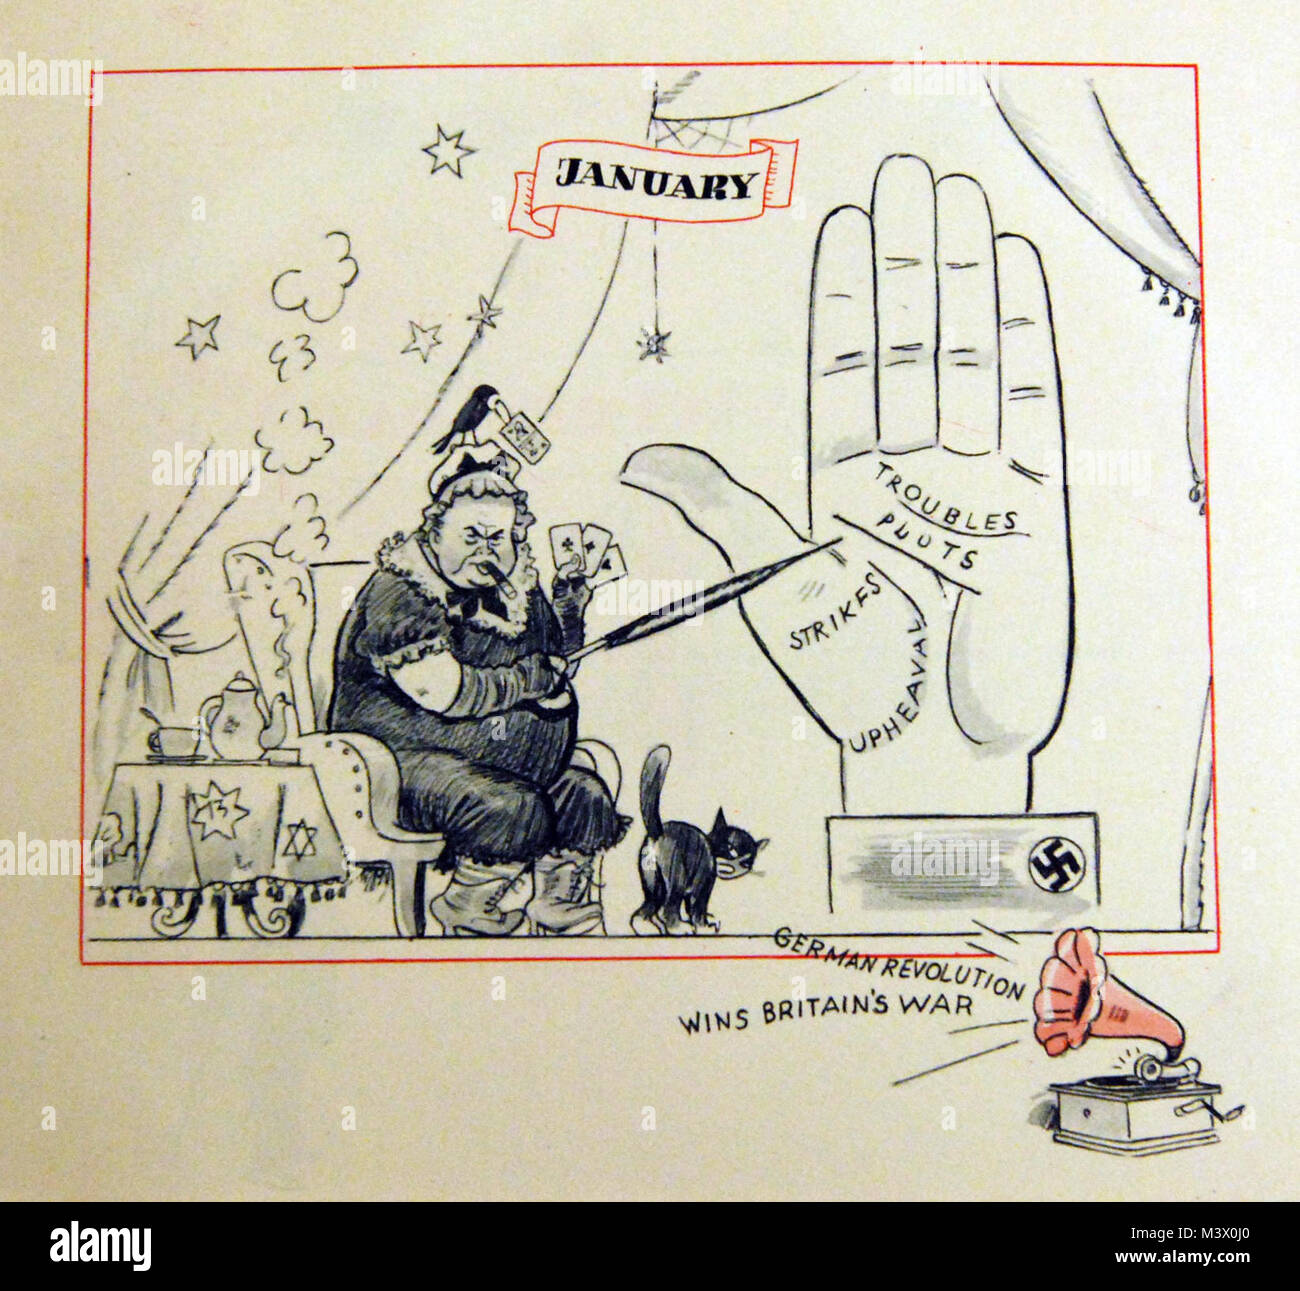 Lot-3867-3: WWII-Cartoons.   Twelve-month pamphlet ridiculing the British war situation in 1940. Shown:  January.   Woman in chair points to German-Nazi hand with the gramophone that is shouting, “German Revolution Wins Britain’s War.”  Note the Jewish stars on the table cloth.     Courtesy of the Library of Congress.  (2018/02/02). Lot-3867-3 26171855048 o Stock Photo